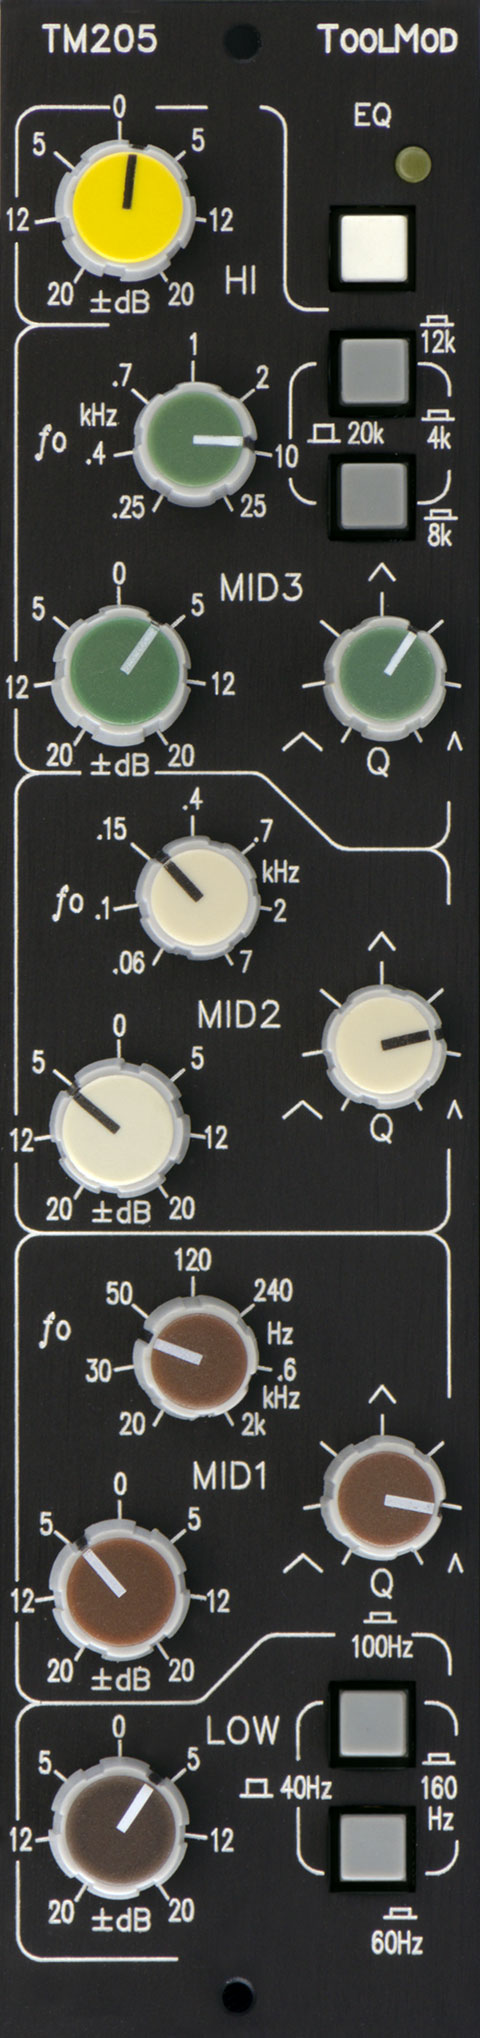 Stereo Mastering Equalizer with 20 dB Control Range, vertical Version